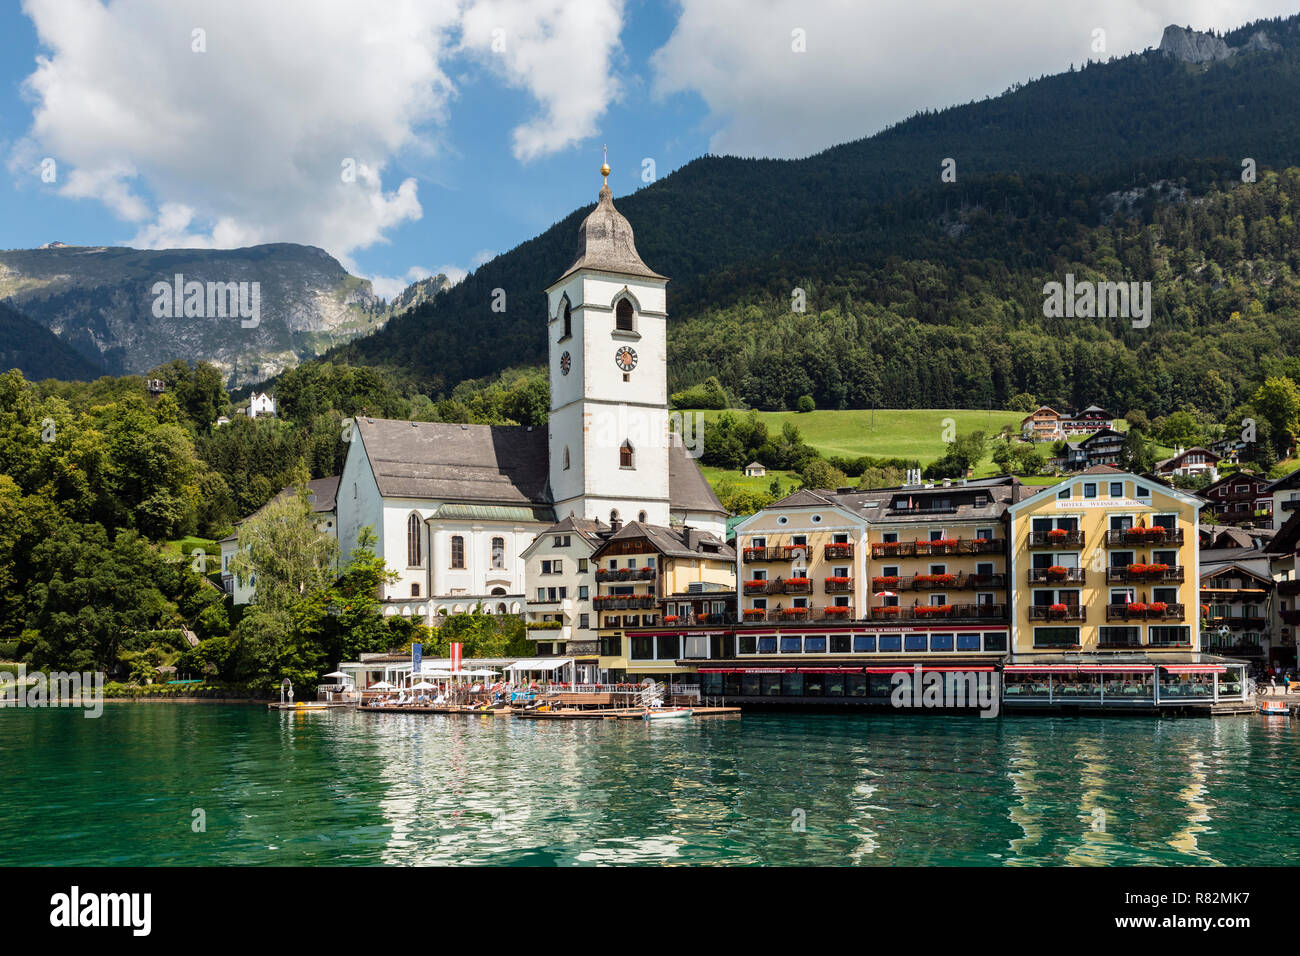 Church of St Wolfgang and the White Horse Inn from the lake, St Wolfgang im Salzkammergut, Austria Stock Photo